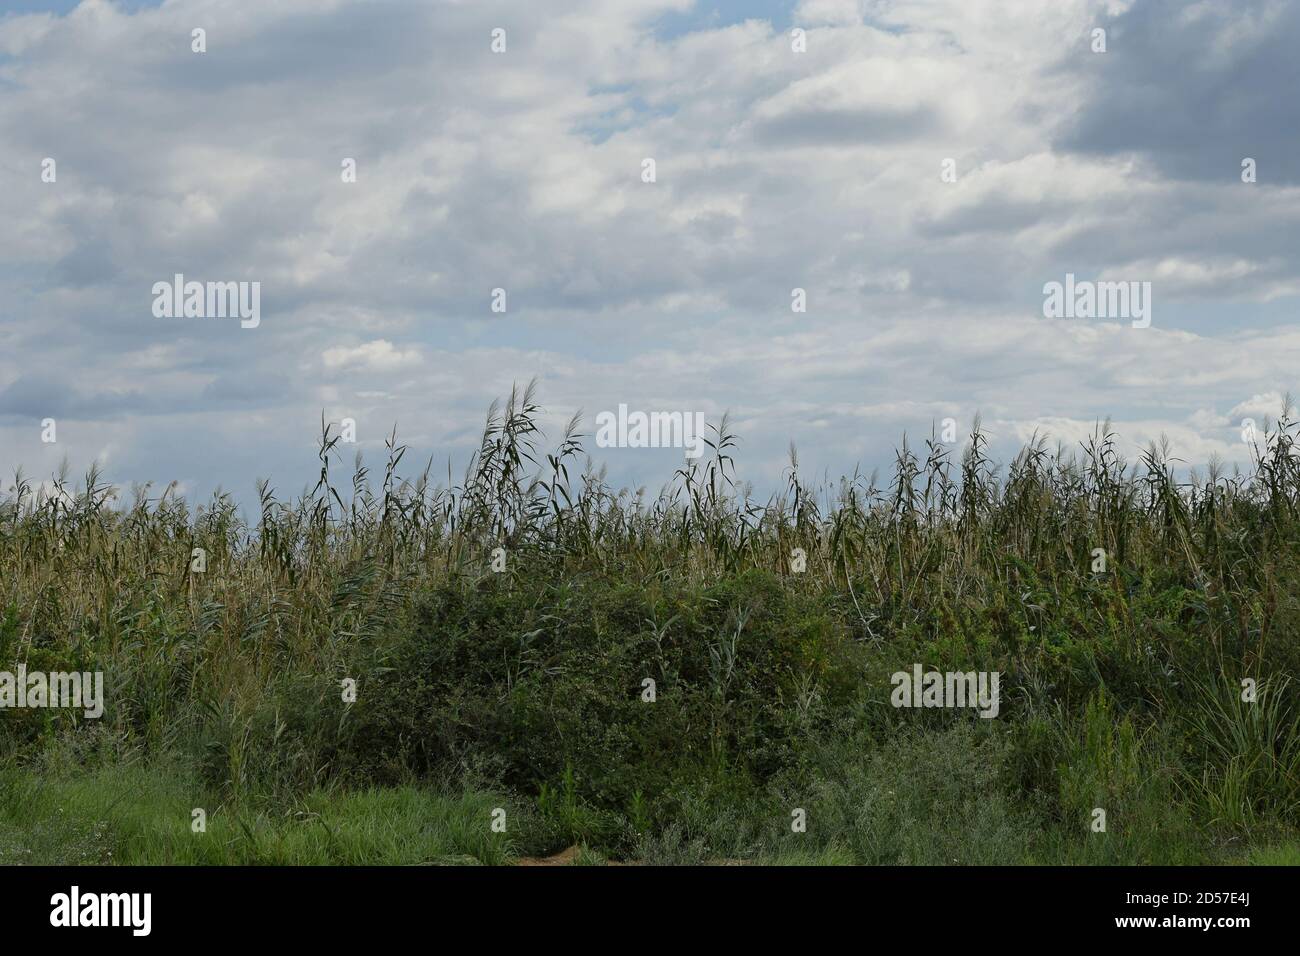 Reed plants dense vegetation and cloudy sky. Swamp landscape. Stock Photo